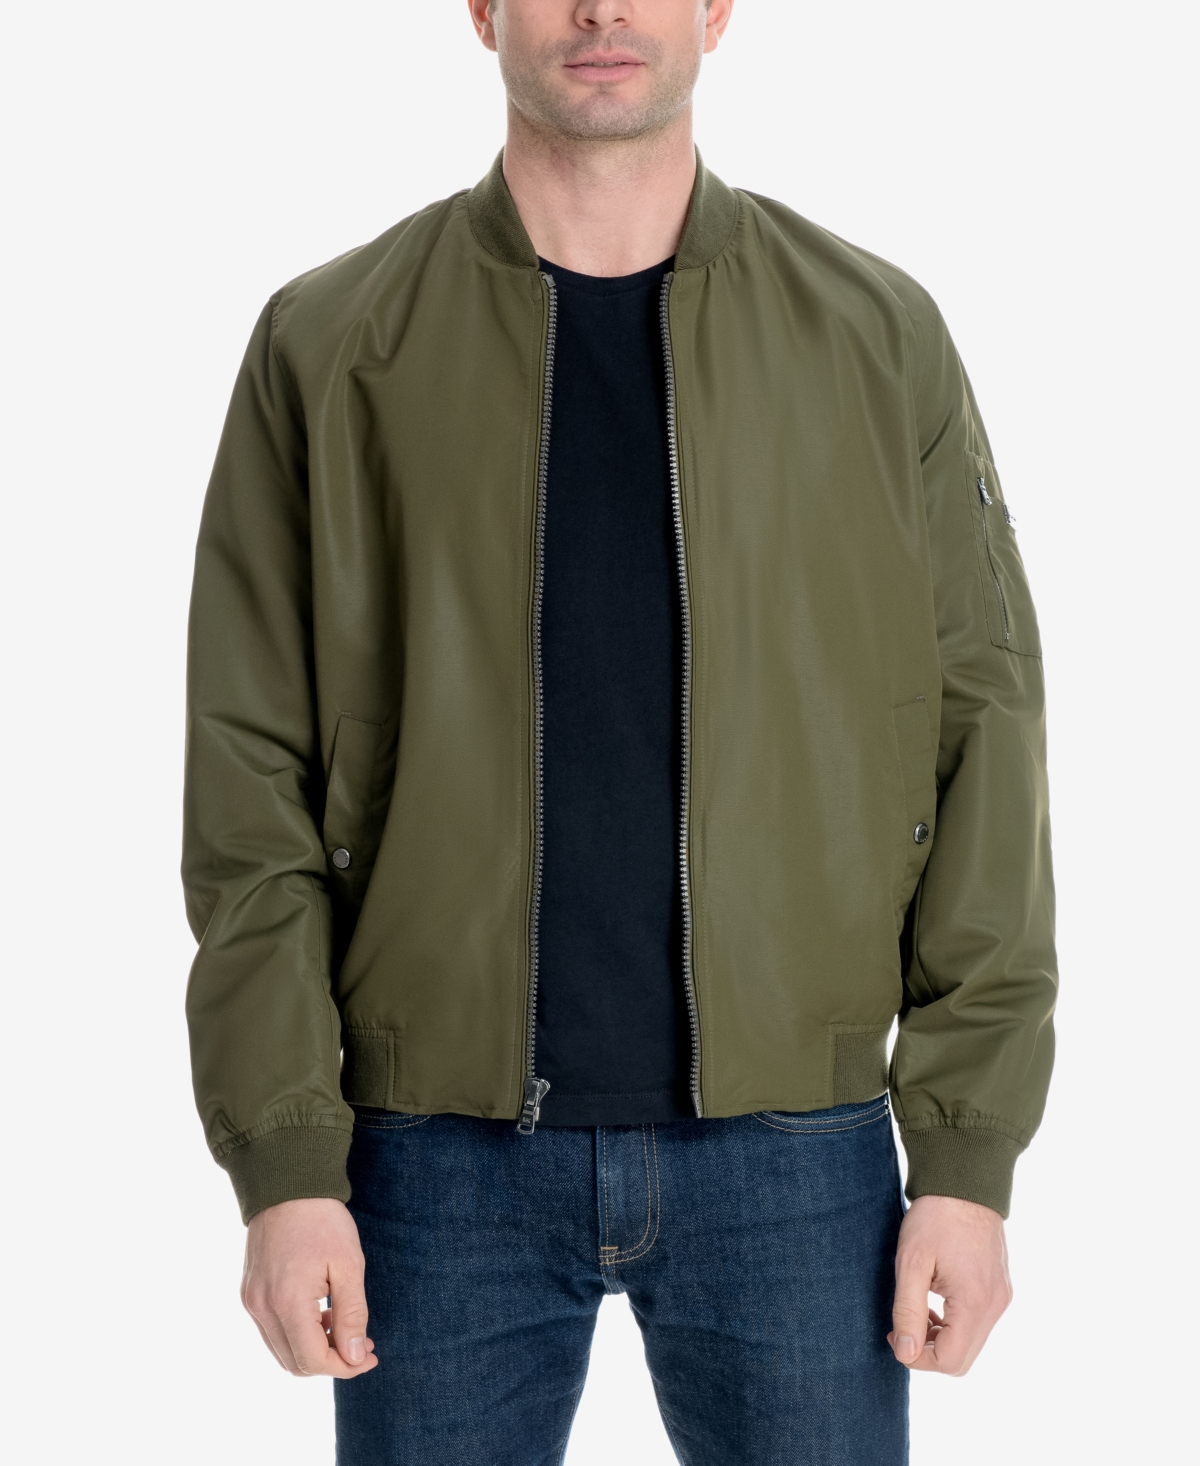 Men's Bomber Jacket, Created for Macy's - Military Olive